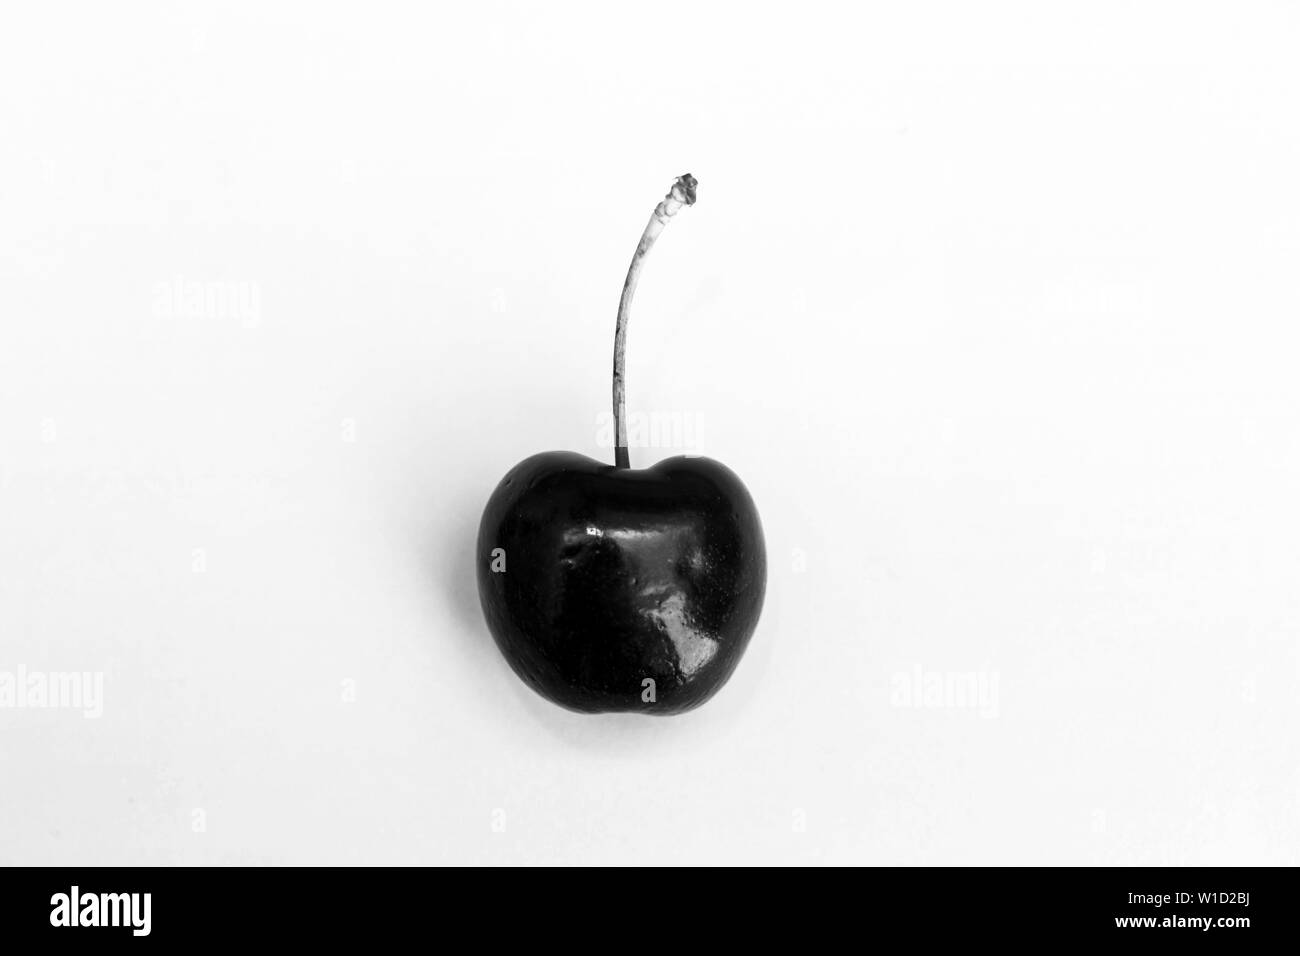 Cherry fruit Isolated on black and white background. beautiful pink concept top view Stock Photo